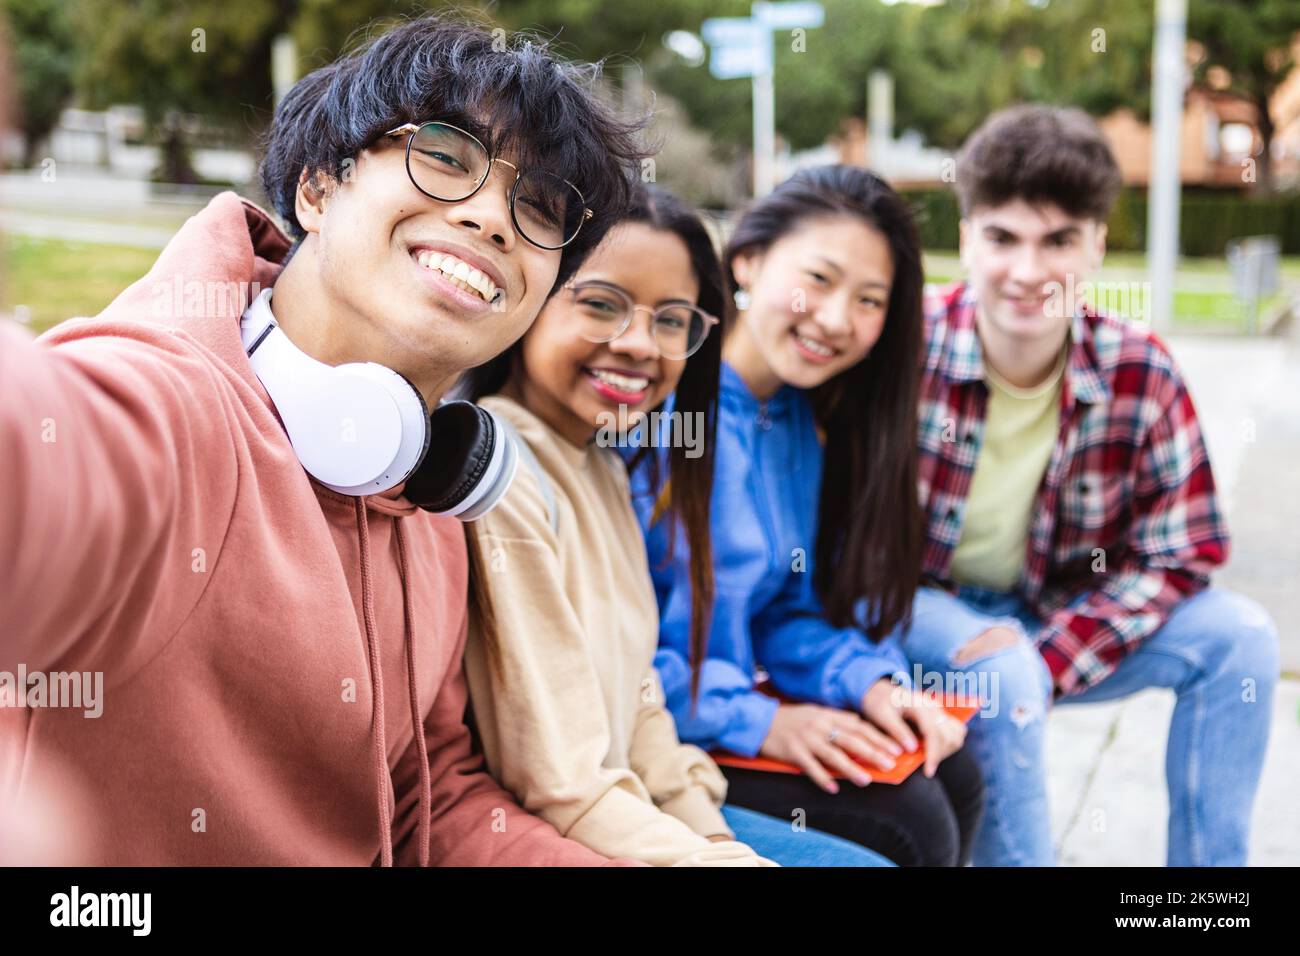 International group of young students taking selfie with phone at college campus Stock Photo